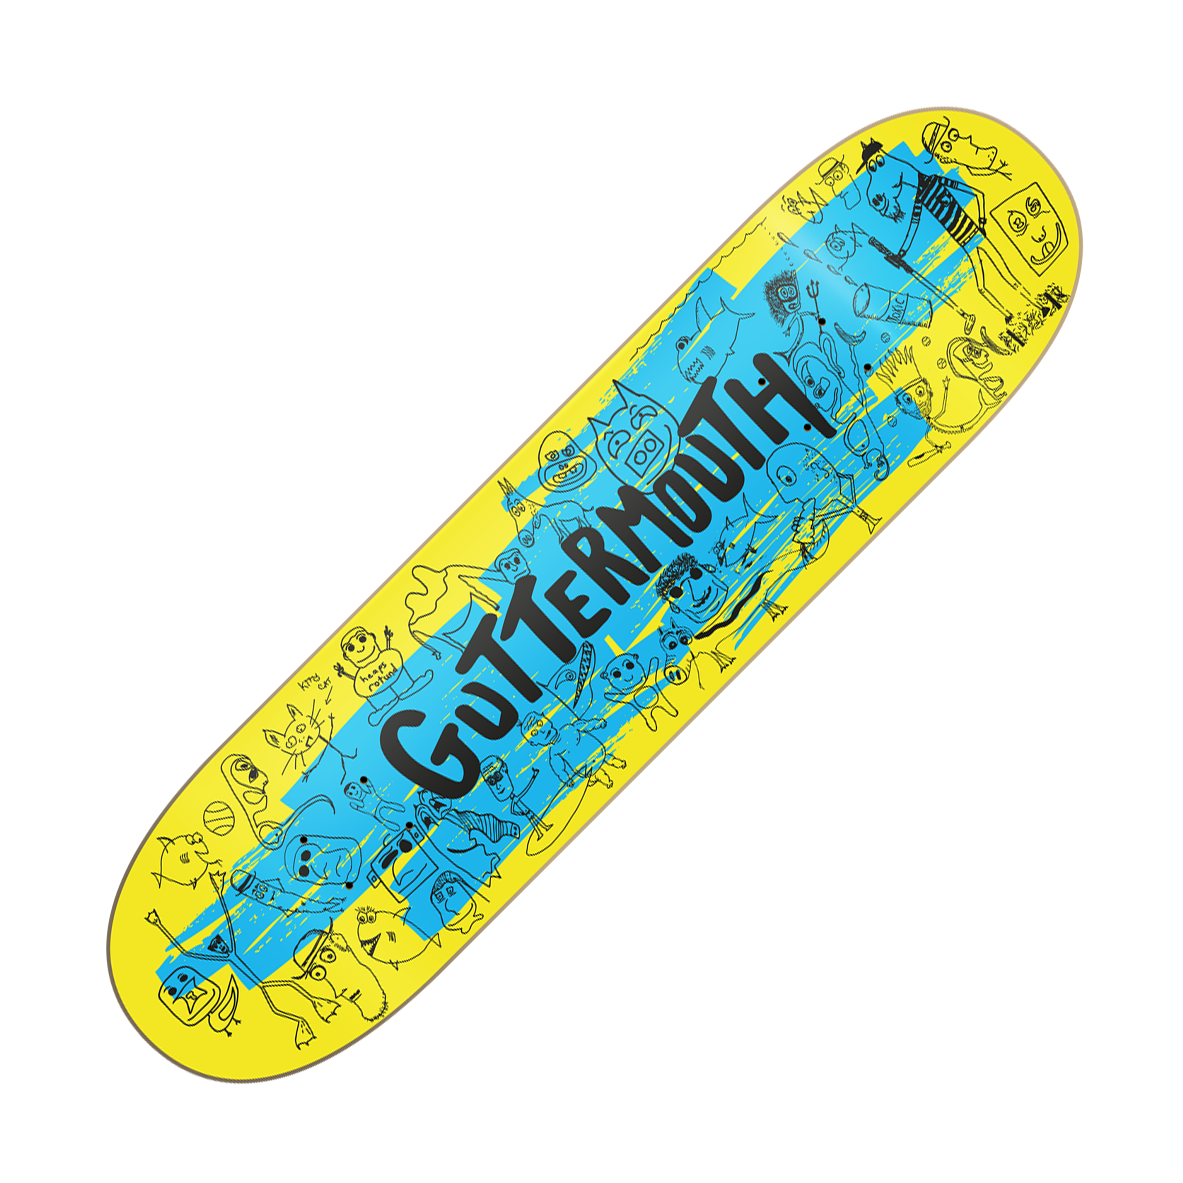 GUTTERMOUTH - "Mark & Taylor Drawings (Blue/Yellow)"